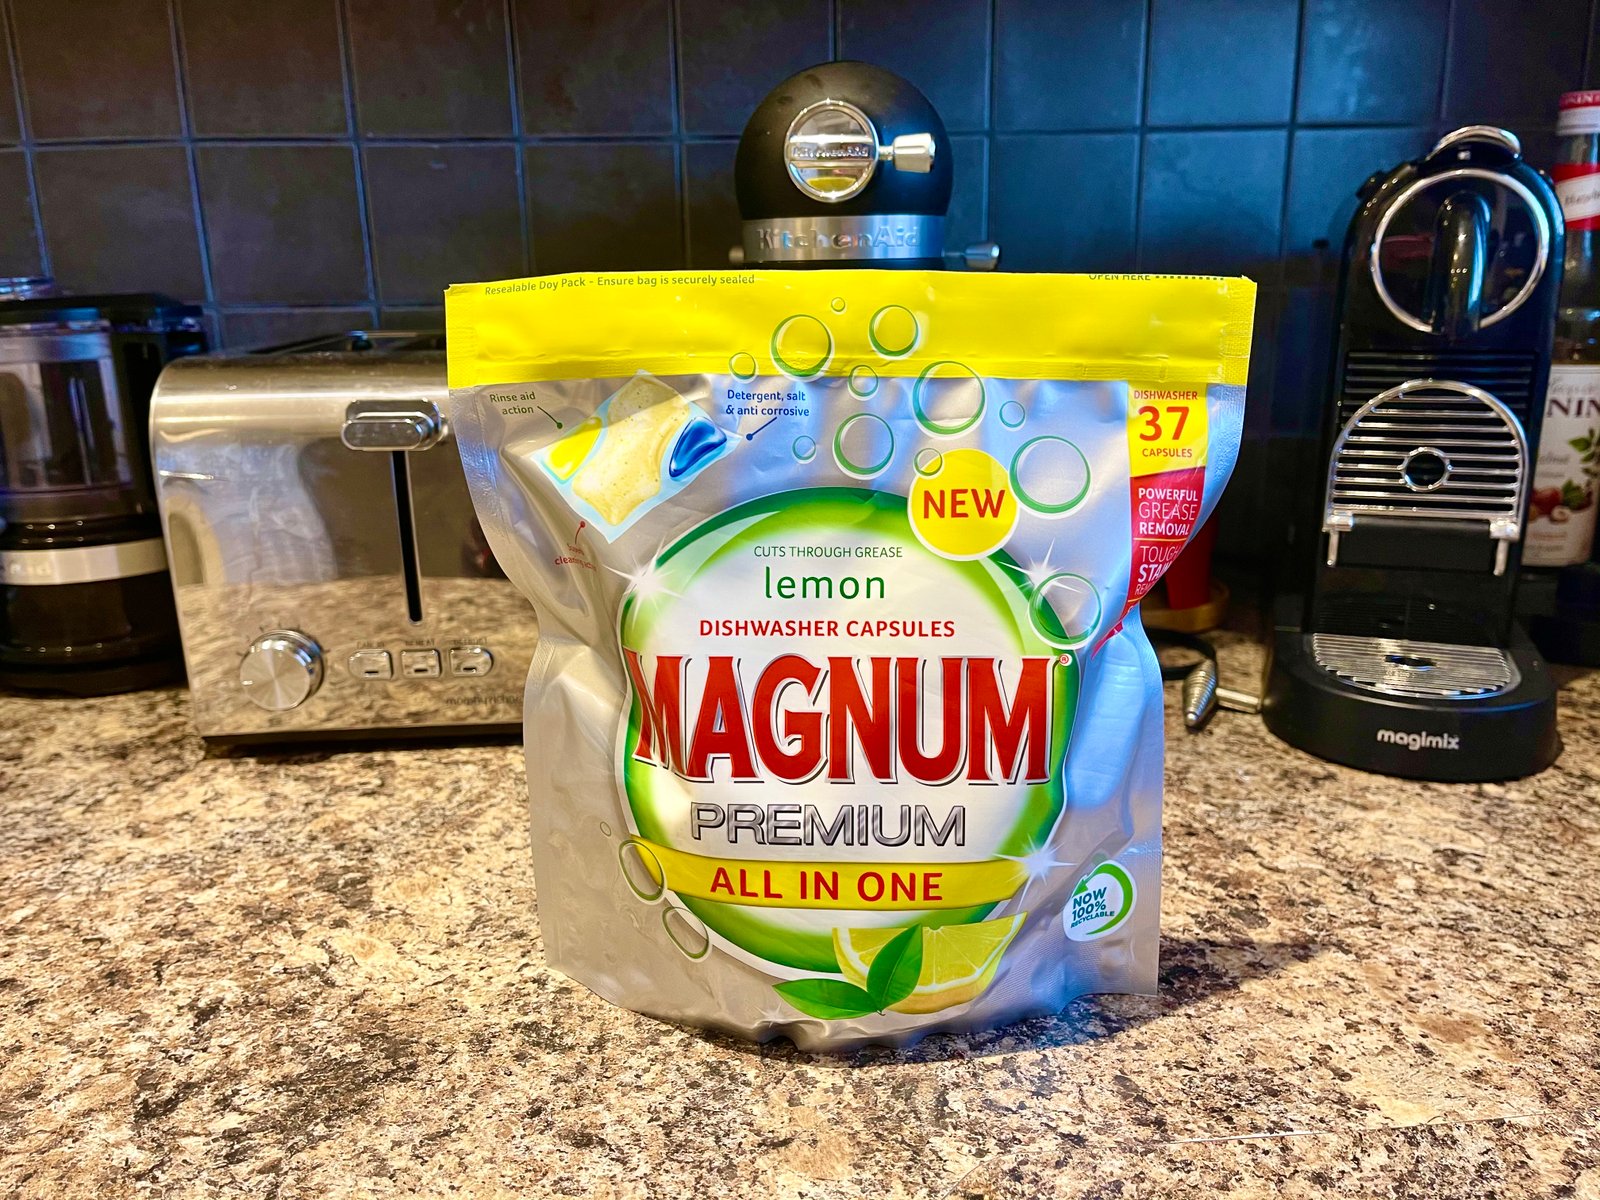 Lei Hang reviews the Aldi Magnum Premium All in One Dishwasher Capsules in lemon scent. Bag of the dishwasher tablets on Lei Hang's kitchen counter with a black and silver nespresso machine and kitchen aid standmixer